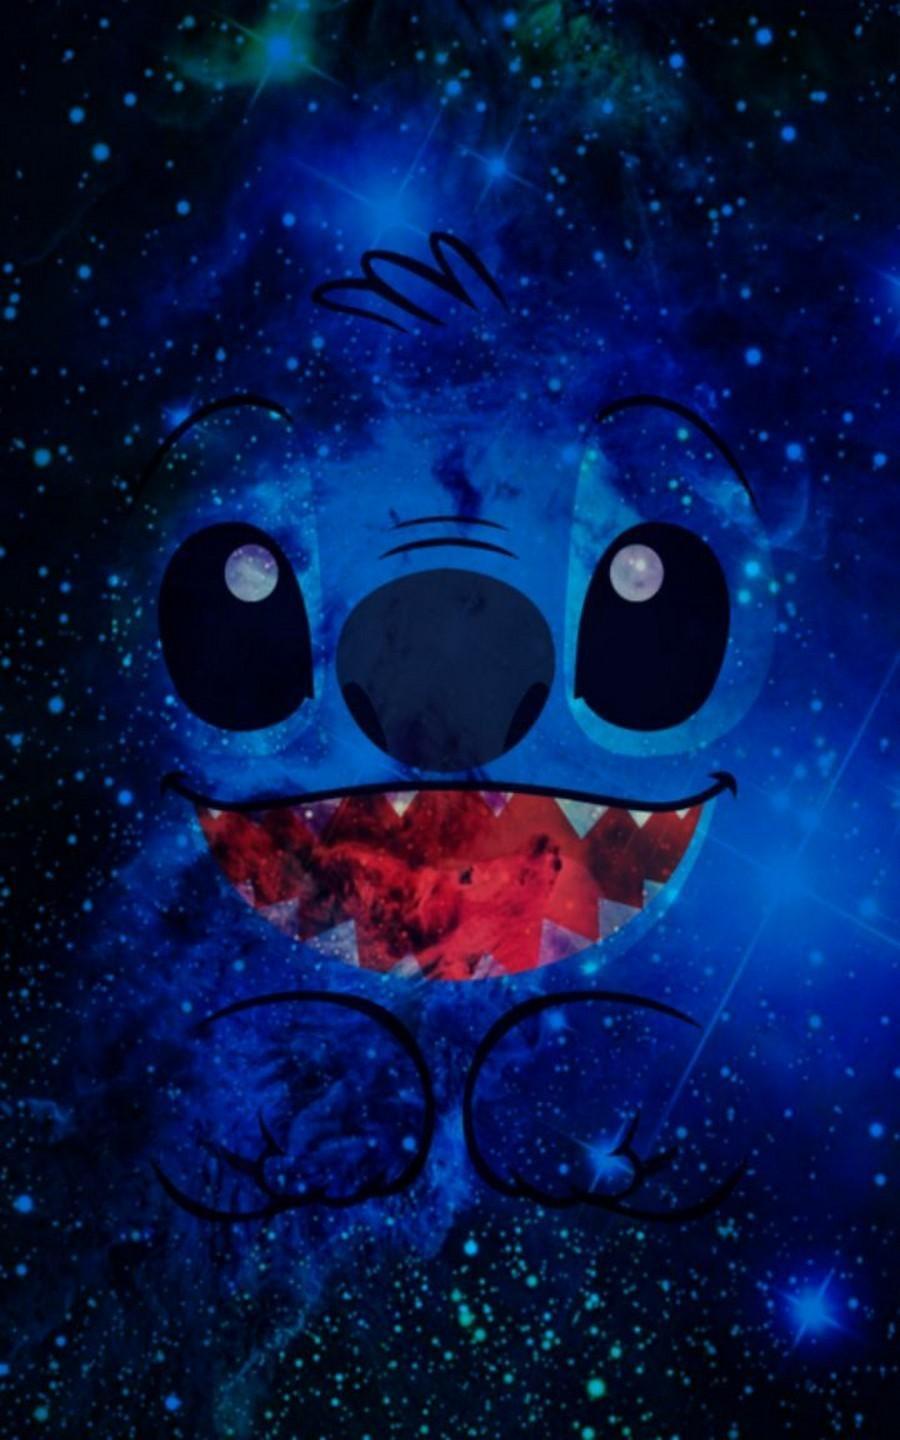 Cool Stitch Wallpapers on WallpaperDog